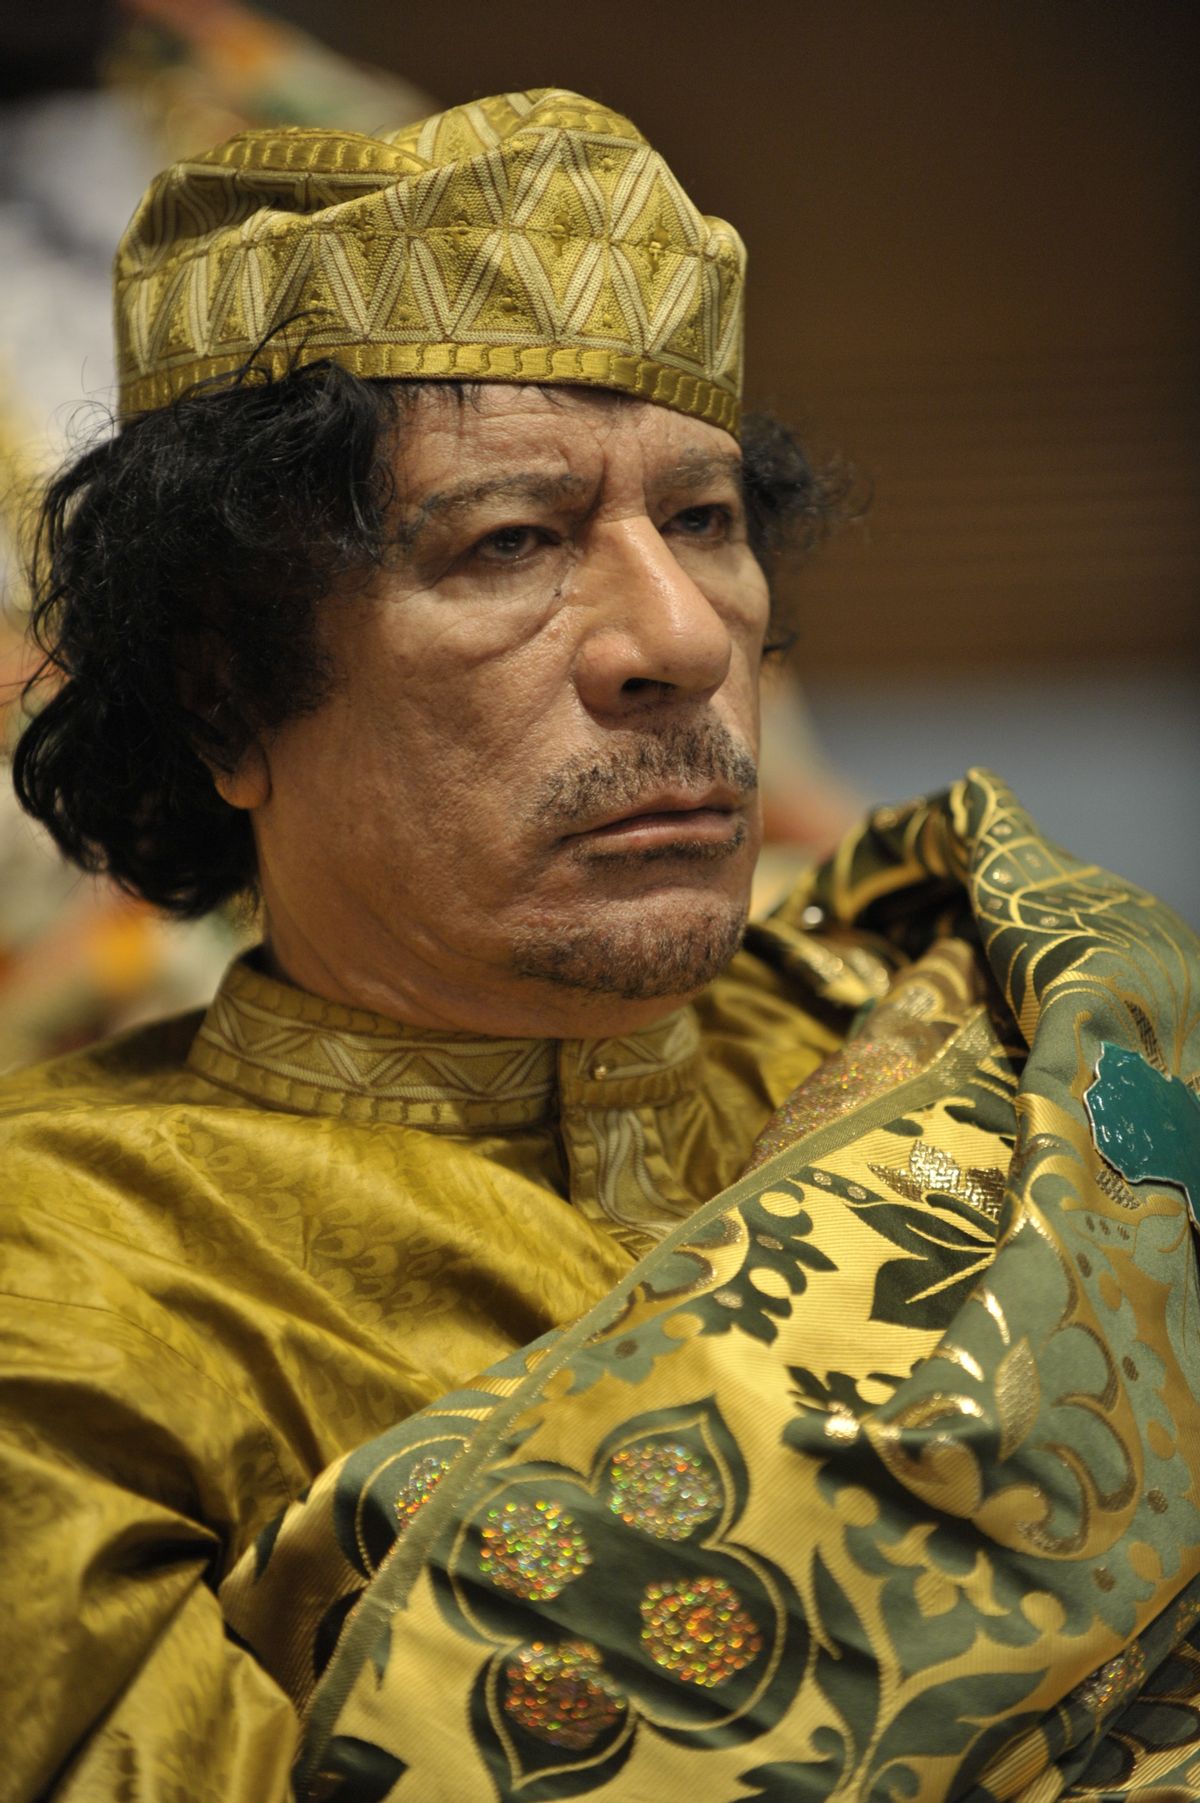 Muammar Qaddafi, the Libyan chief of state, attends the 12th African Union Summit in Addis Ababa, Ethiopia, Feb. 2, 2009. Qaddafi was elected chairman of the organization. (U.S. Navy photo by Mass Communication Specialist 2nd Class Jesse B. Awalt/Released)     (Cjtf-hoa/pao)